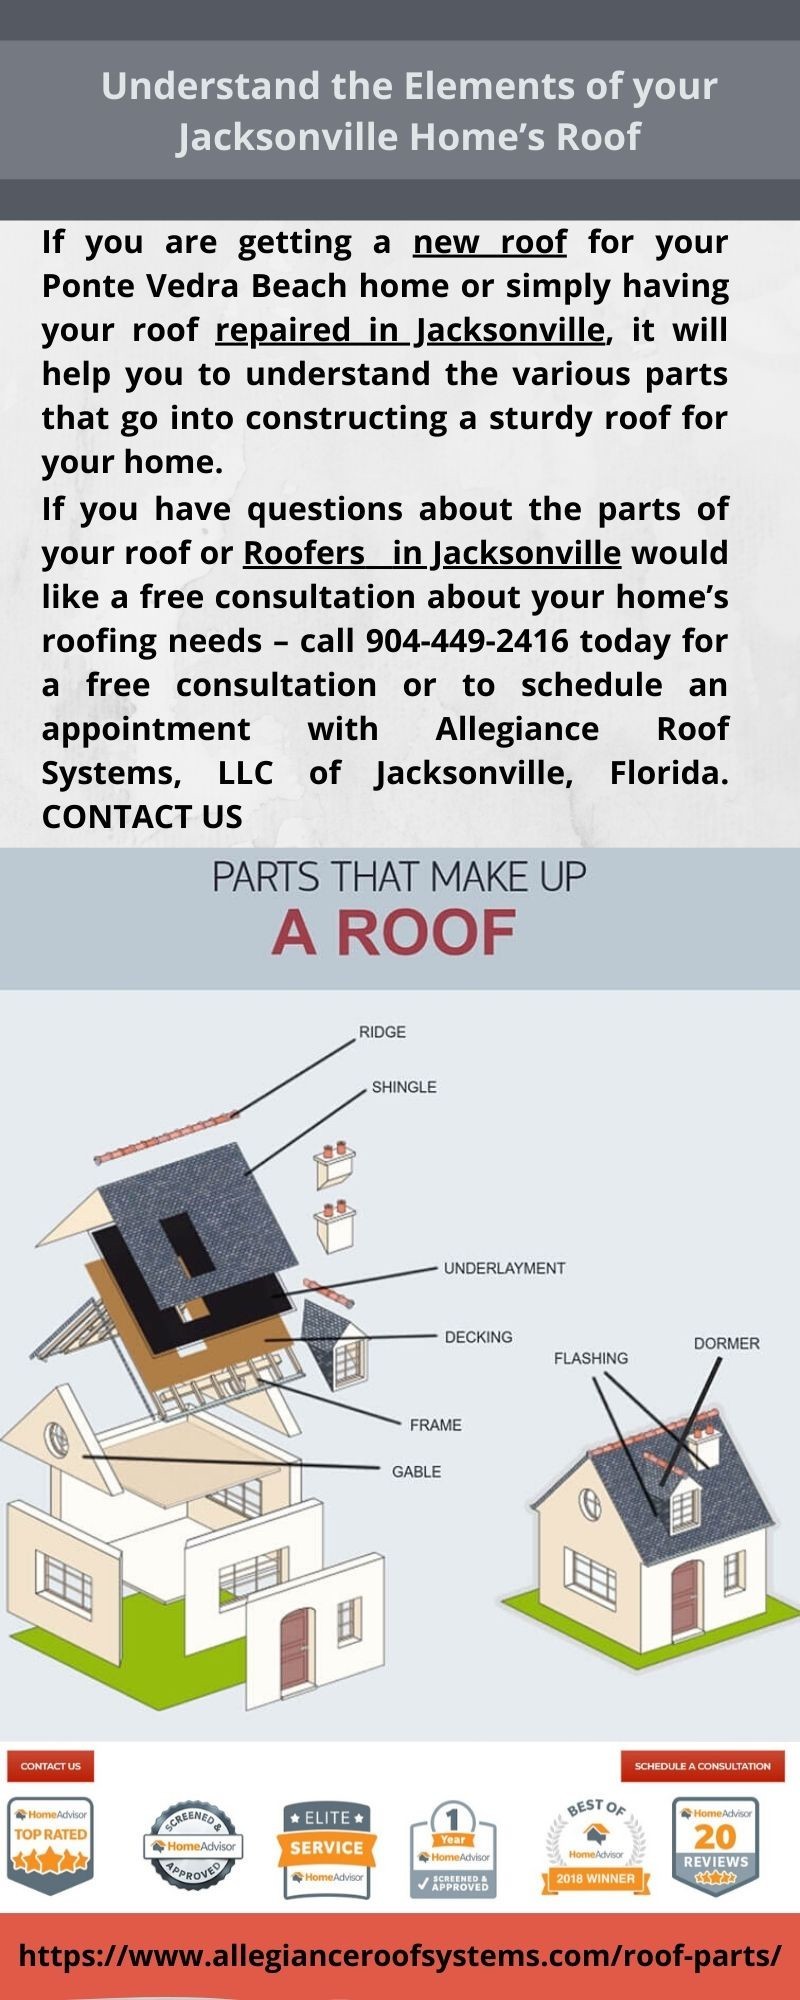  Understand the Elements of your Jacksonville Home’s Roof